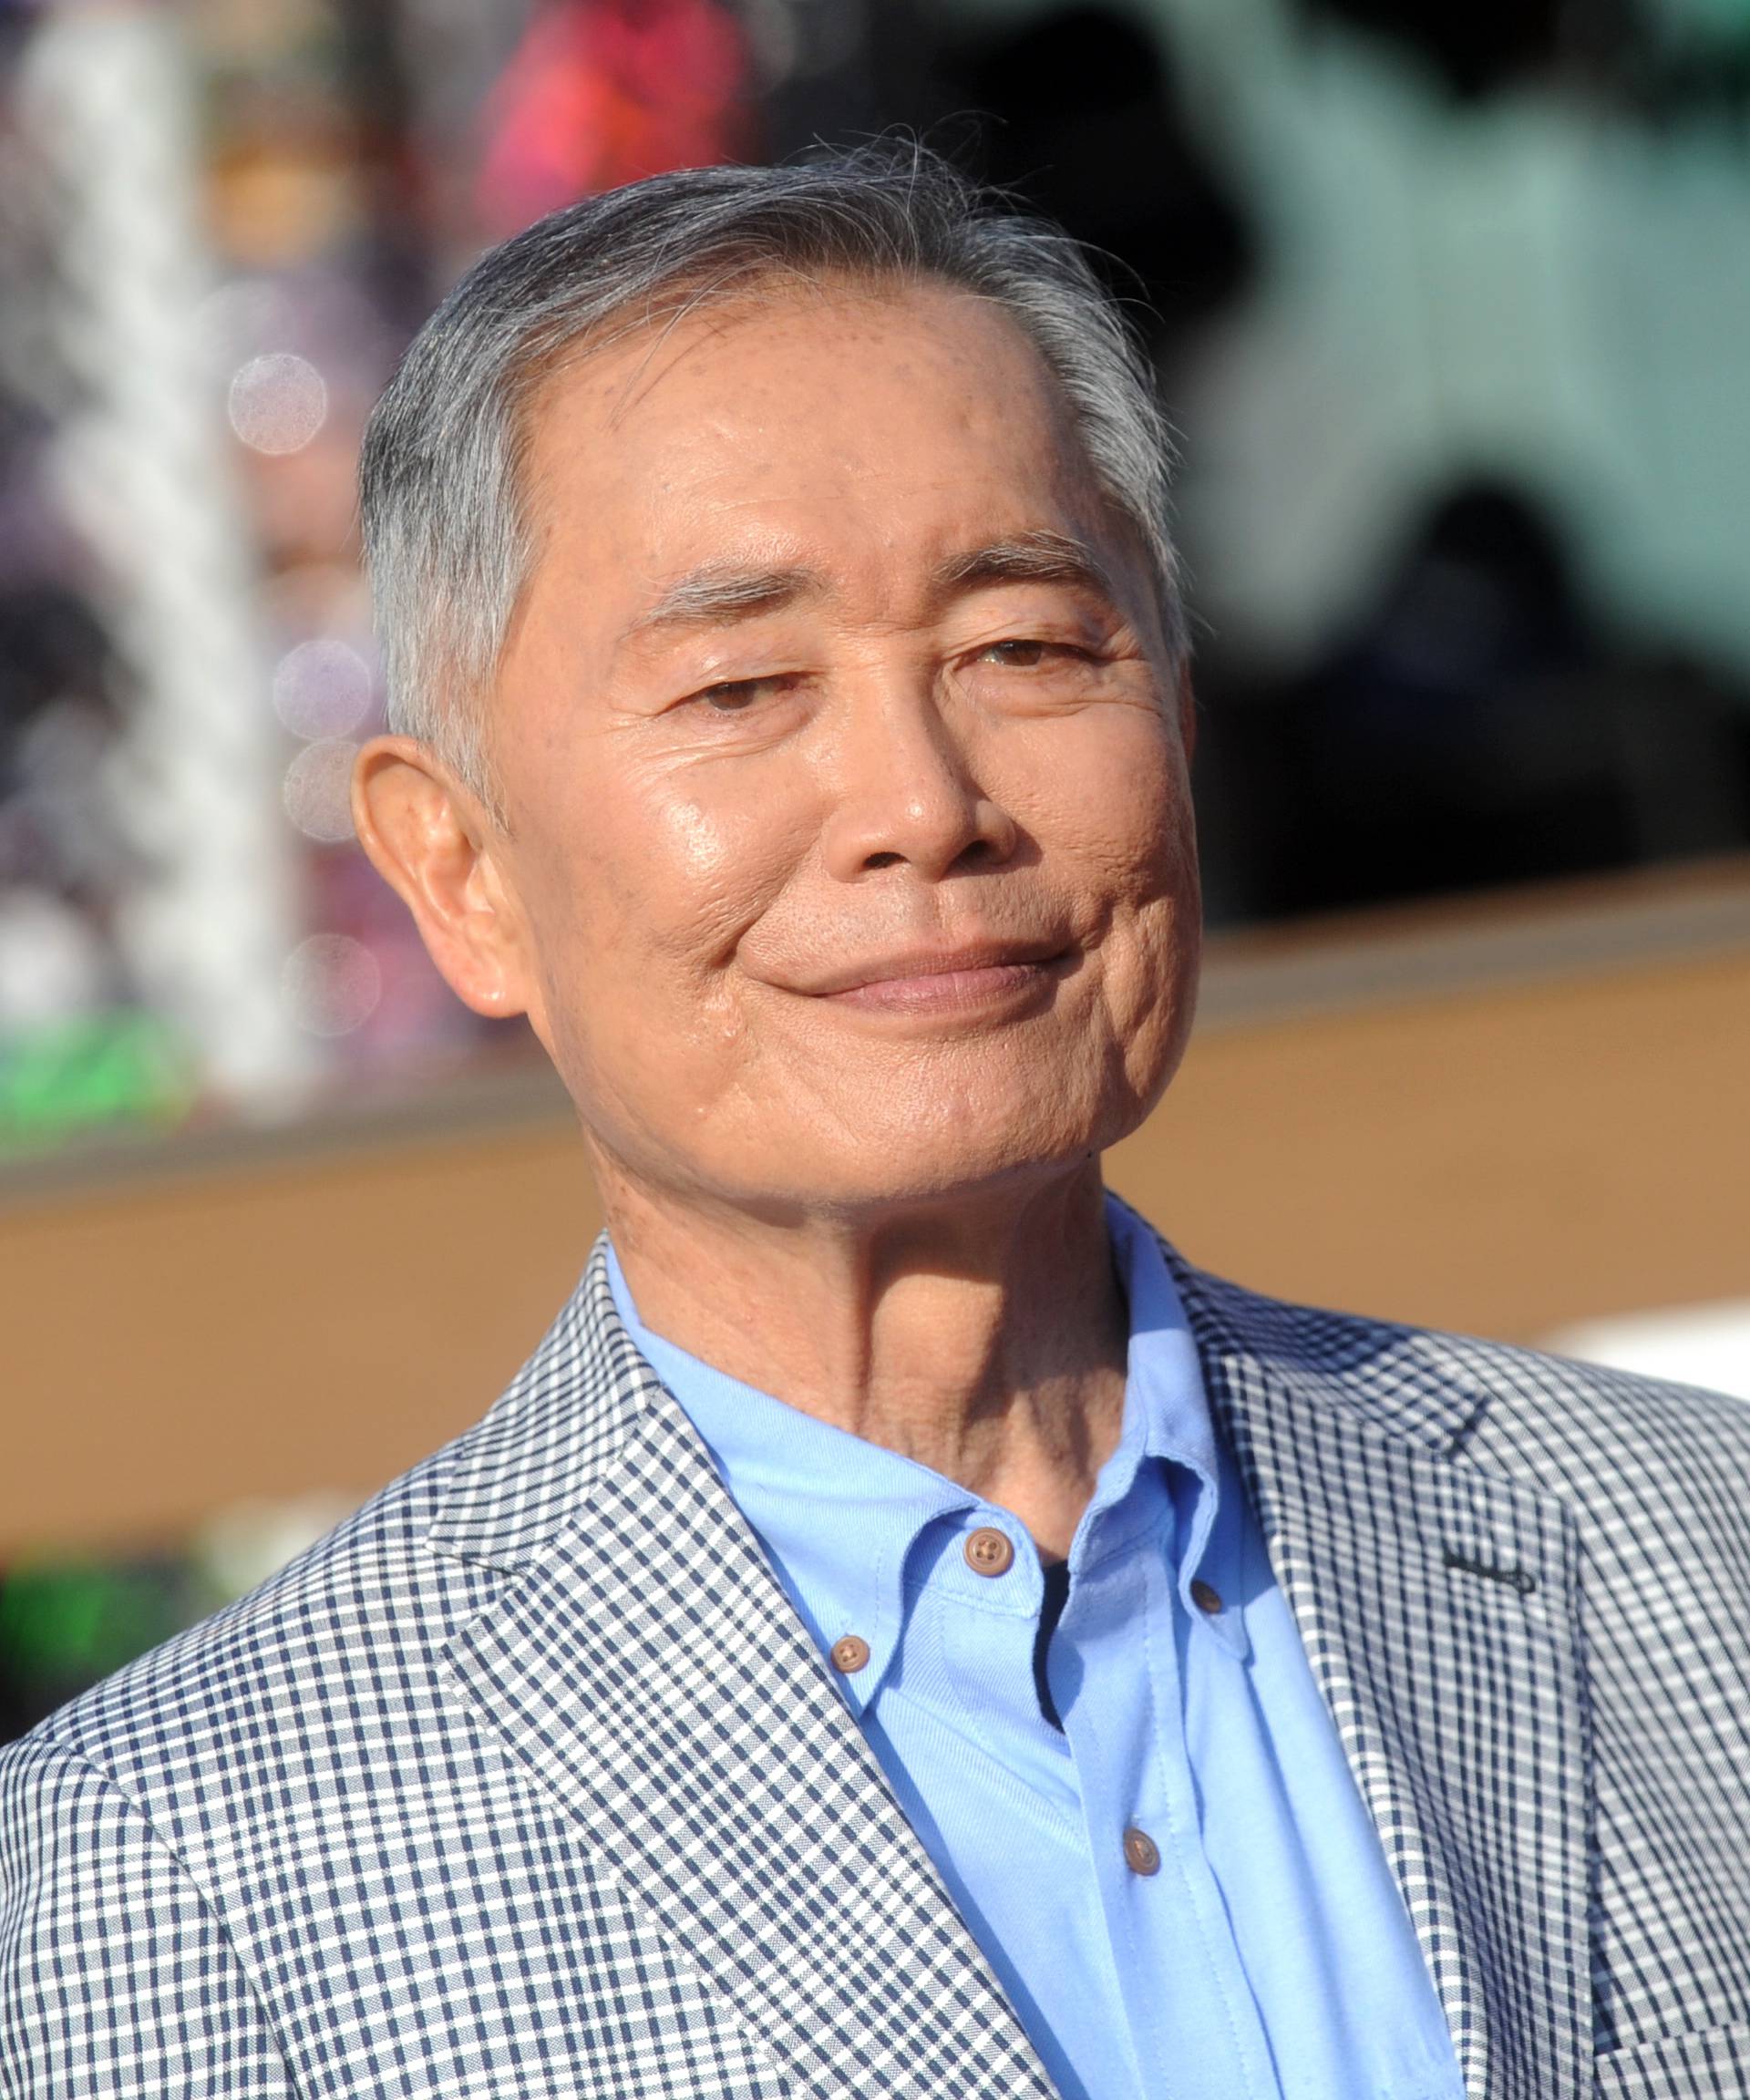 George Takei Ride Of Fame Induction Ceremony - NYC